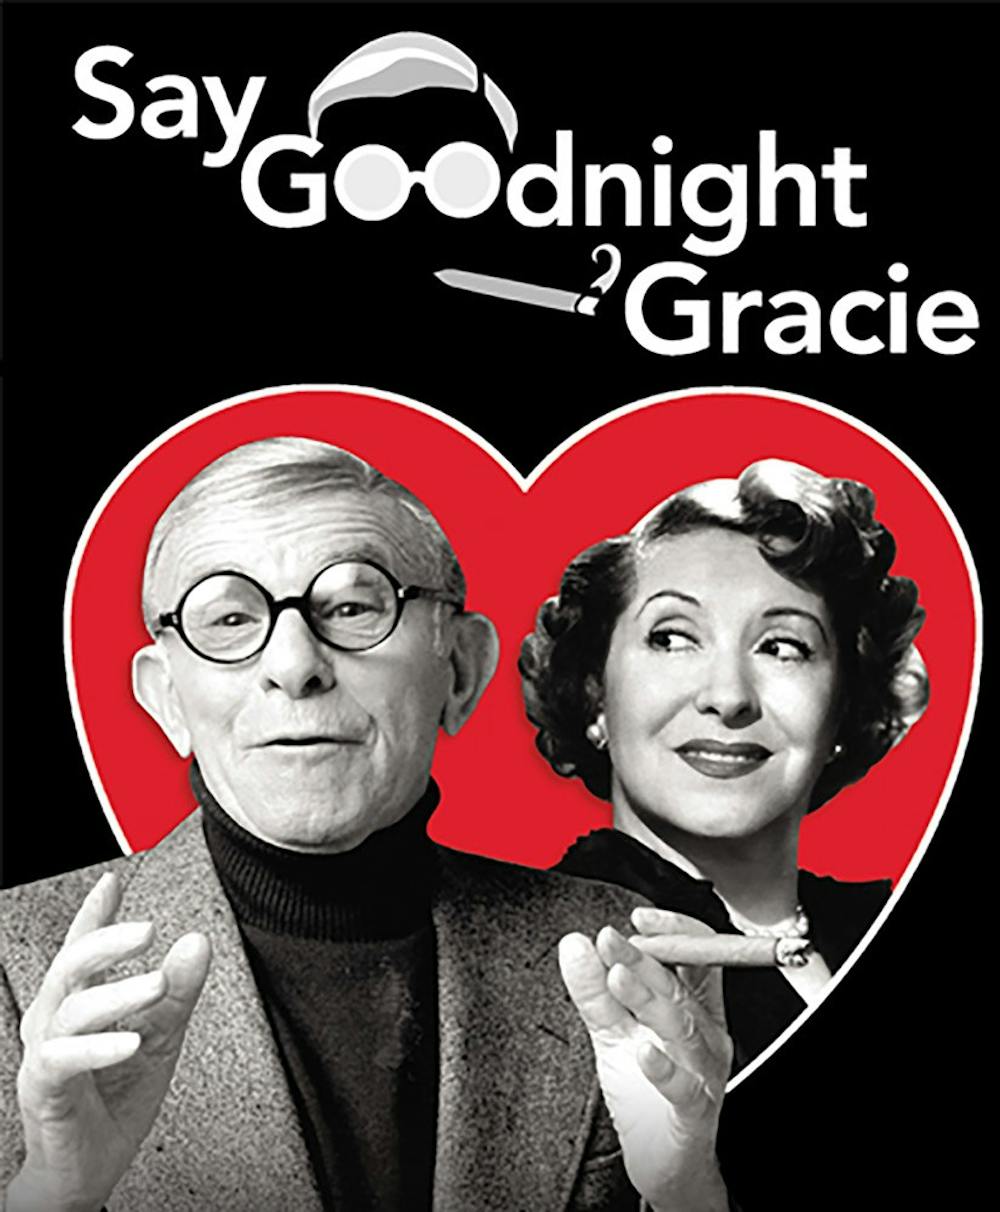 <p><em>Say Goodnight Gracie</em> focuses on George Burns, the pop culture figure from the 20th century famous for his performances in film, television, theater and radio.</p>